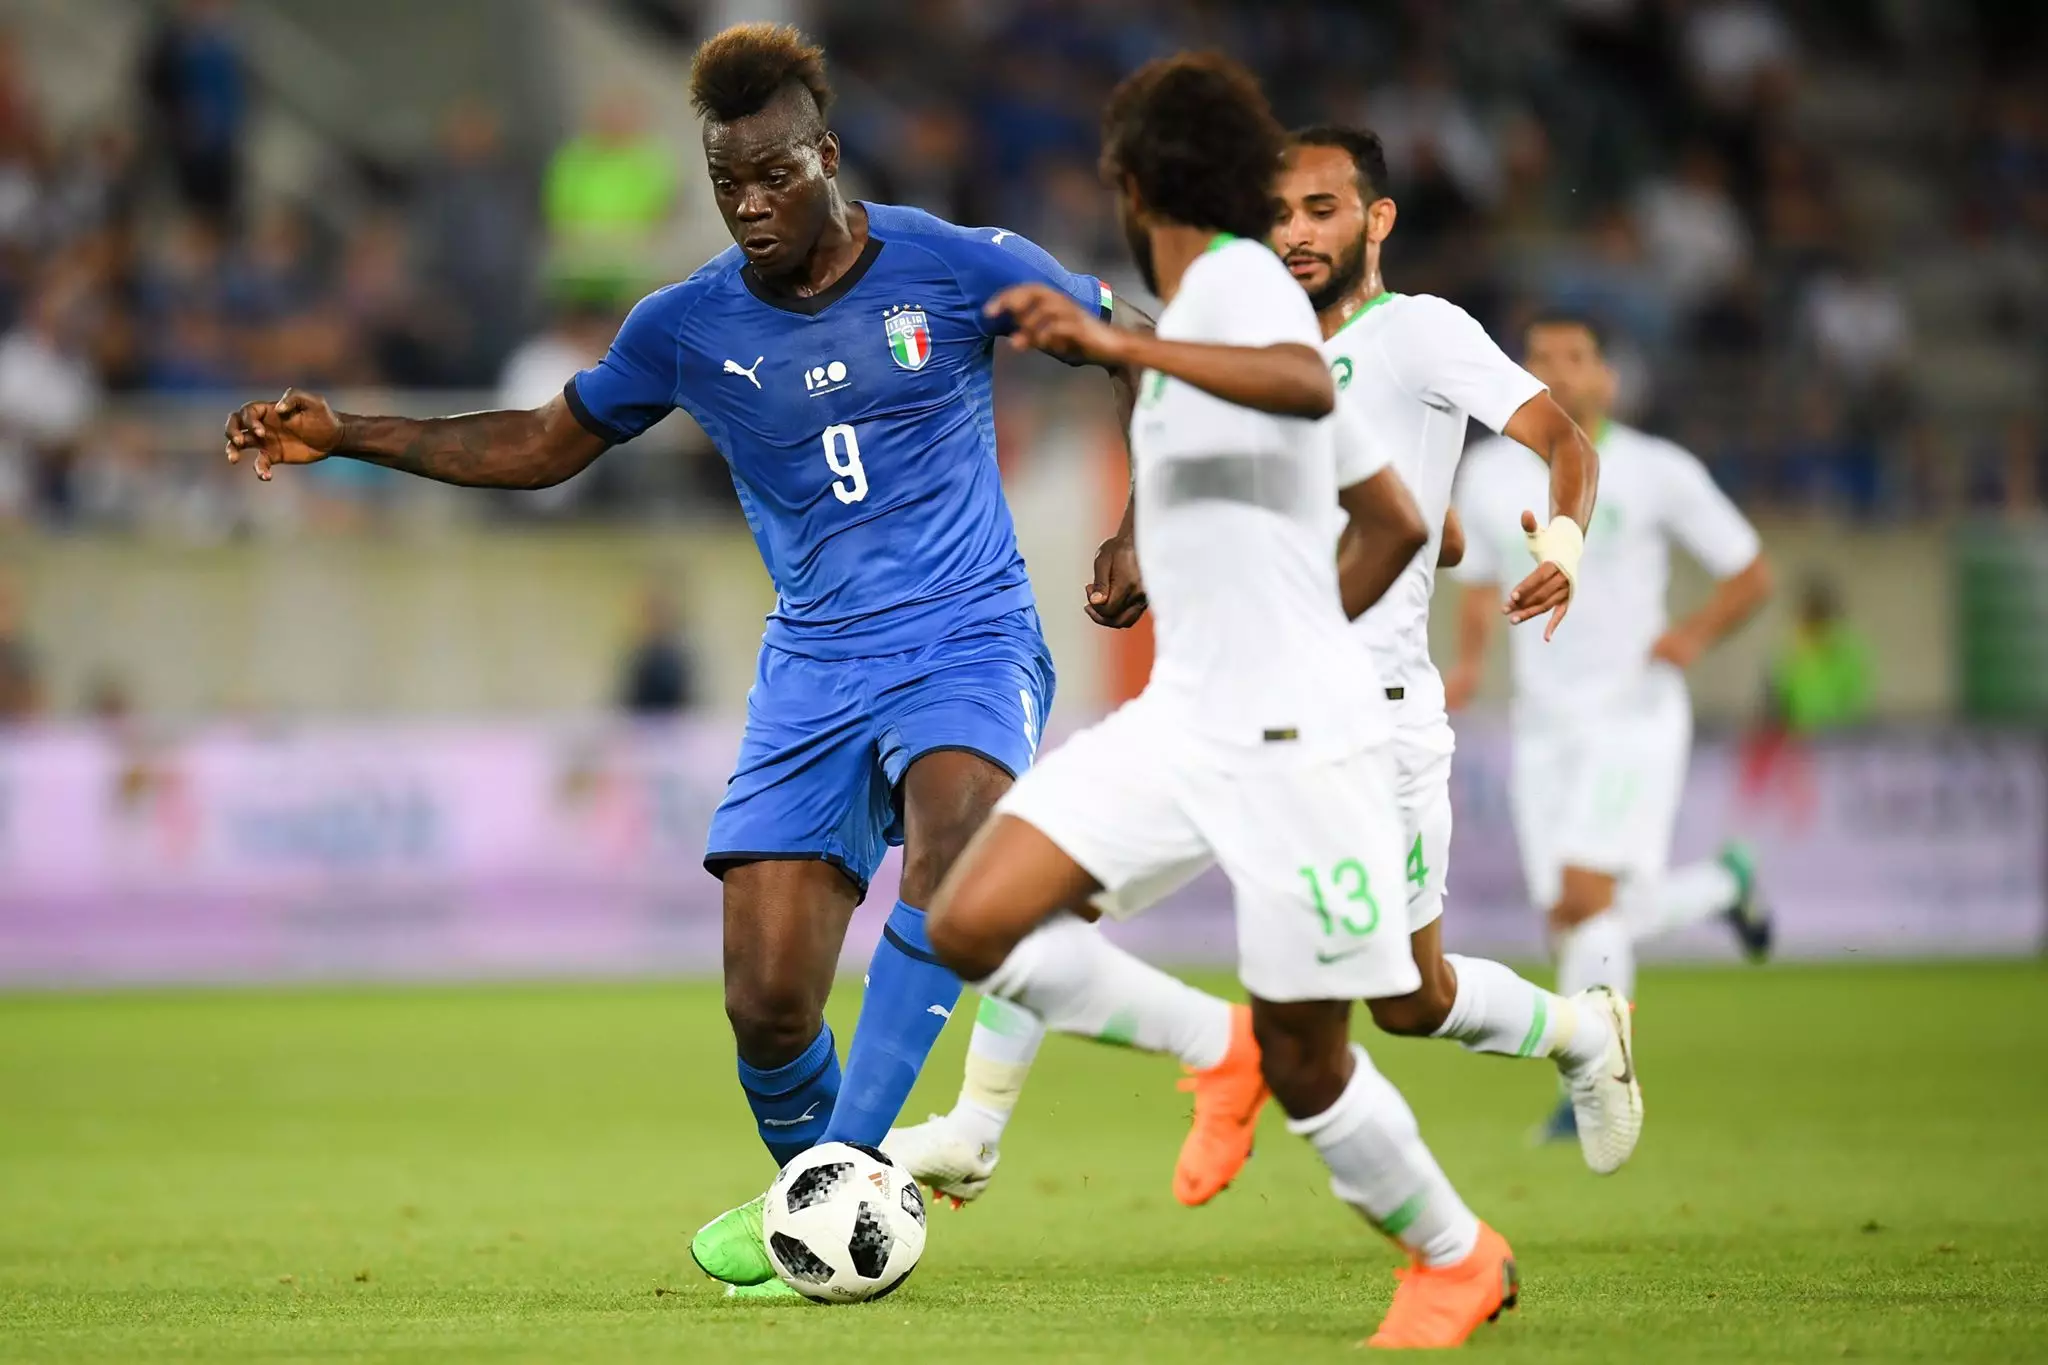 Balotelli in action for Italy. Image: PA